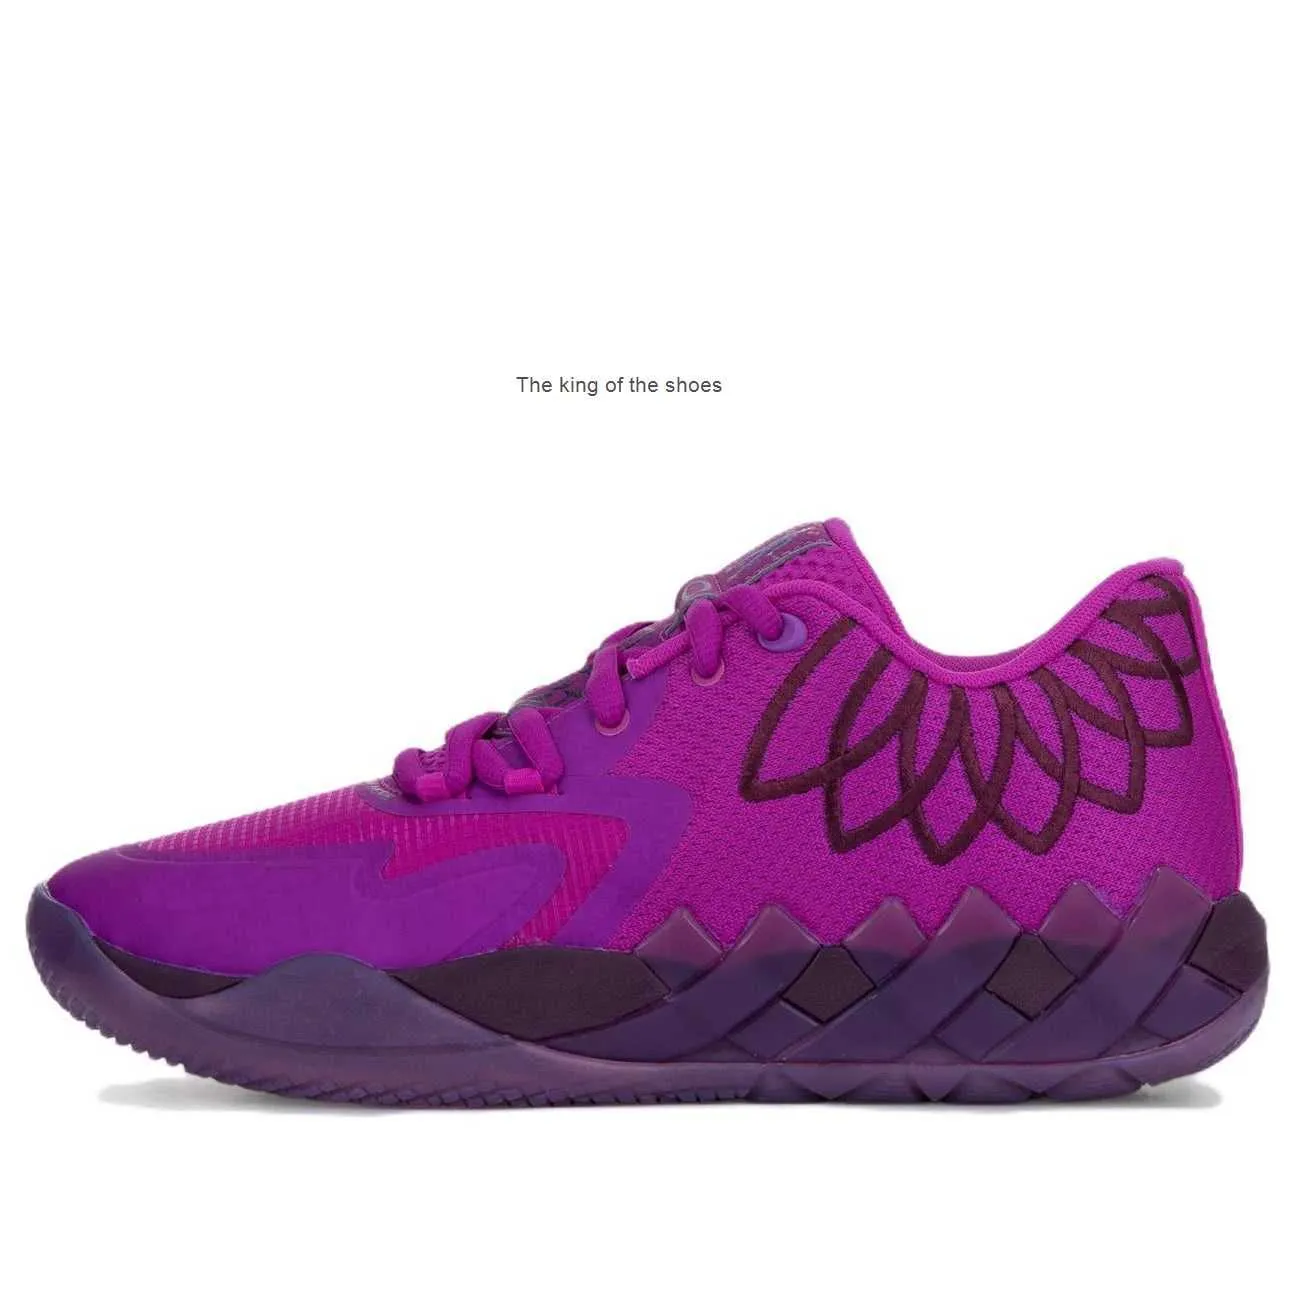 MBLAMELO BALL MB01 LO DISCO PURPLE SHOES TILL SALUE MED BOX MENS WOMENS BASKABALL Sneakers US7.5-US12